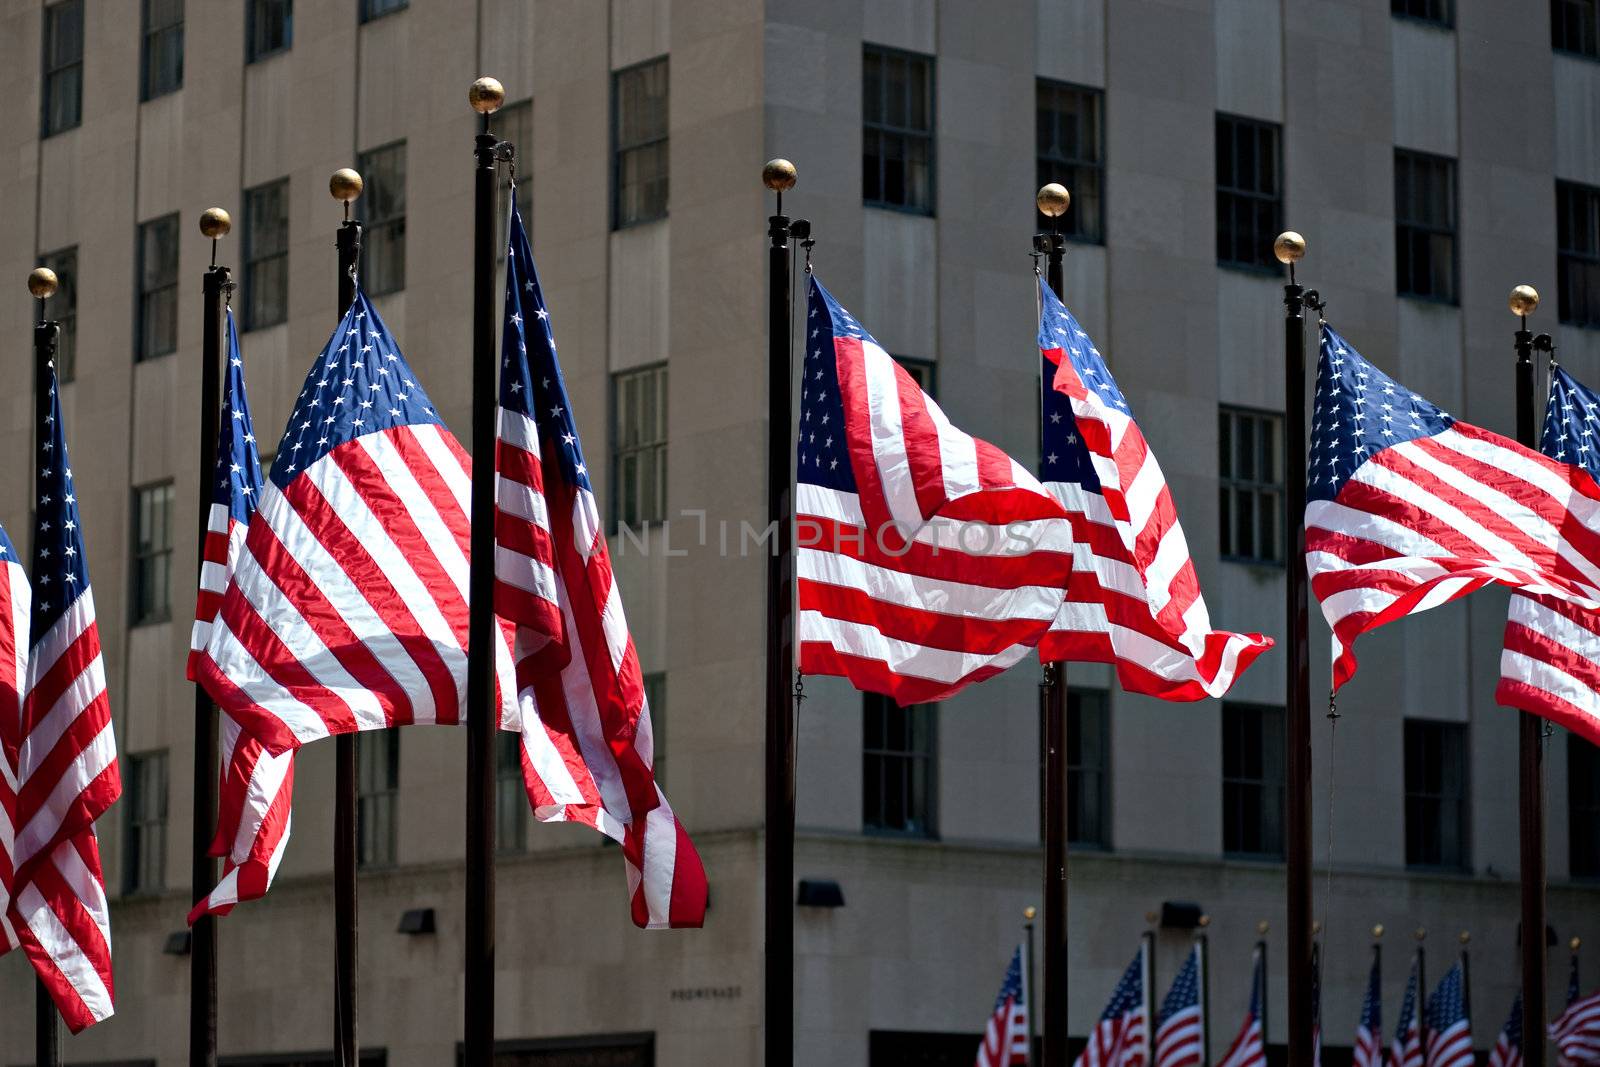 Flags of the United States for 4th of July in front of buildings